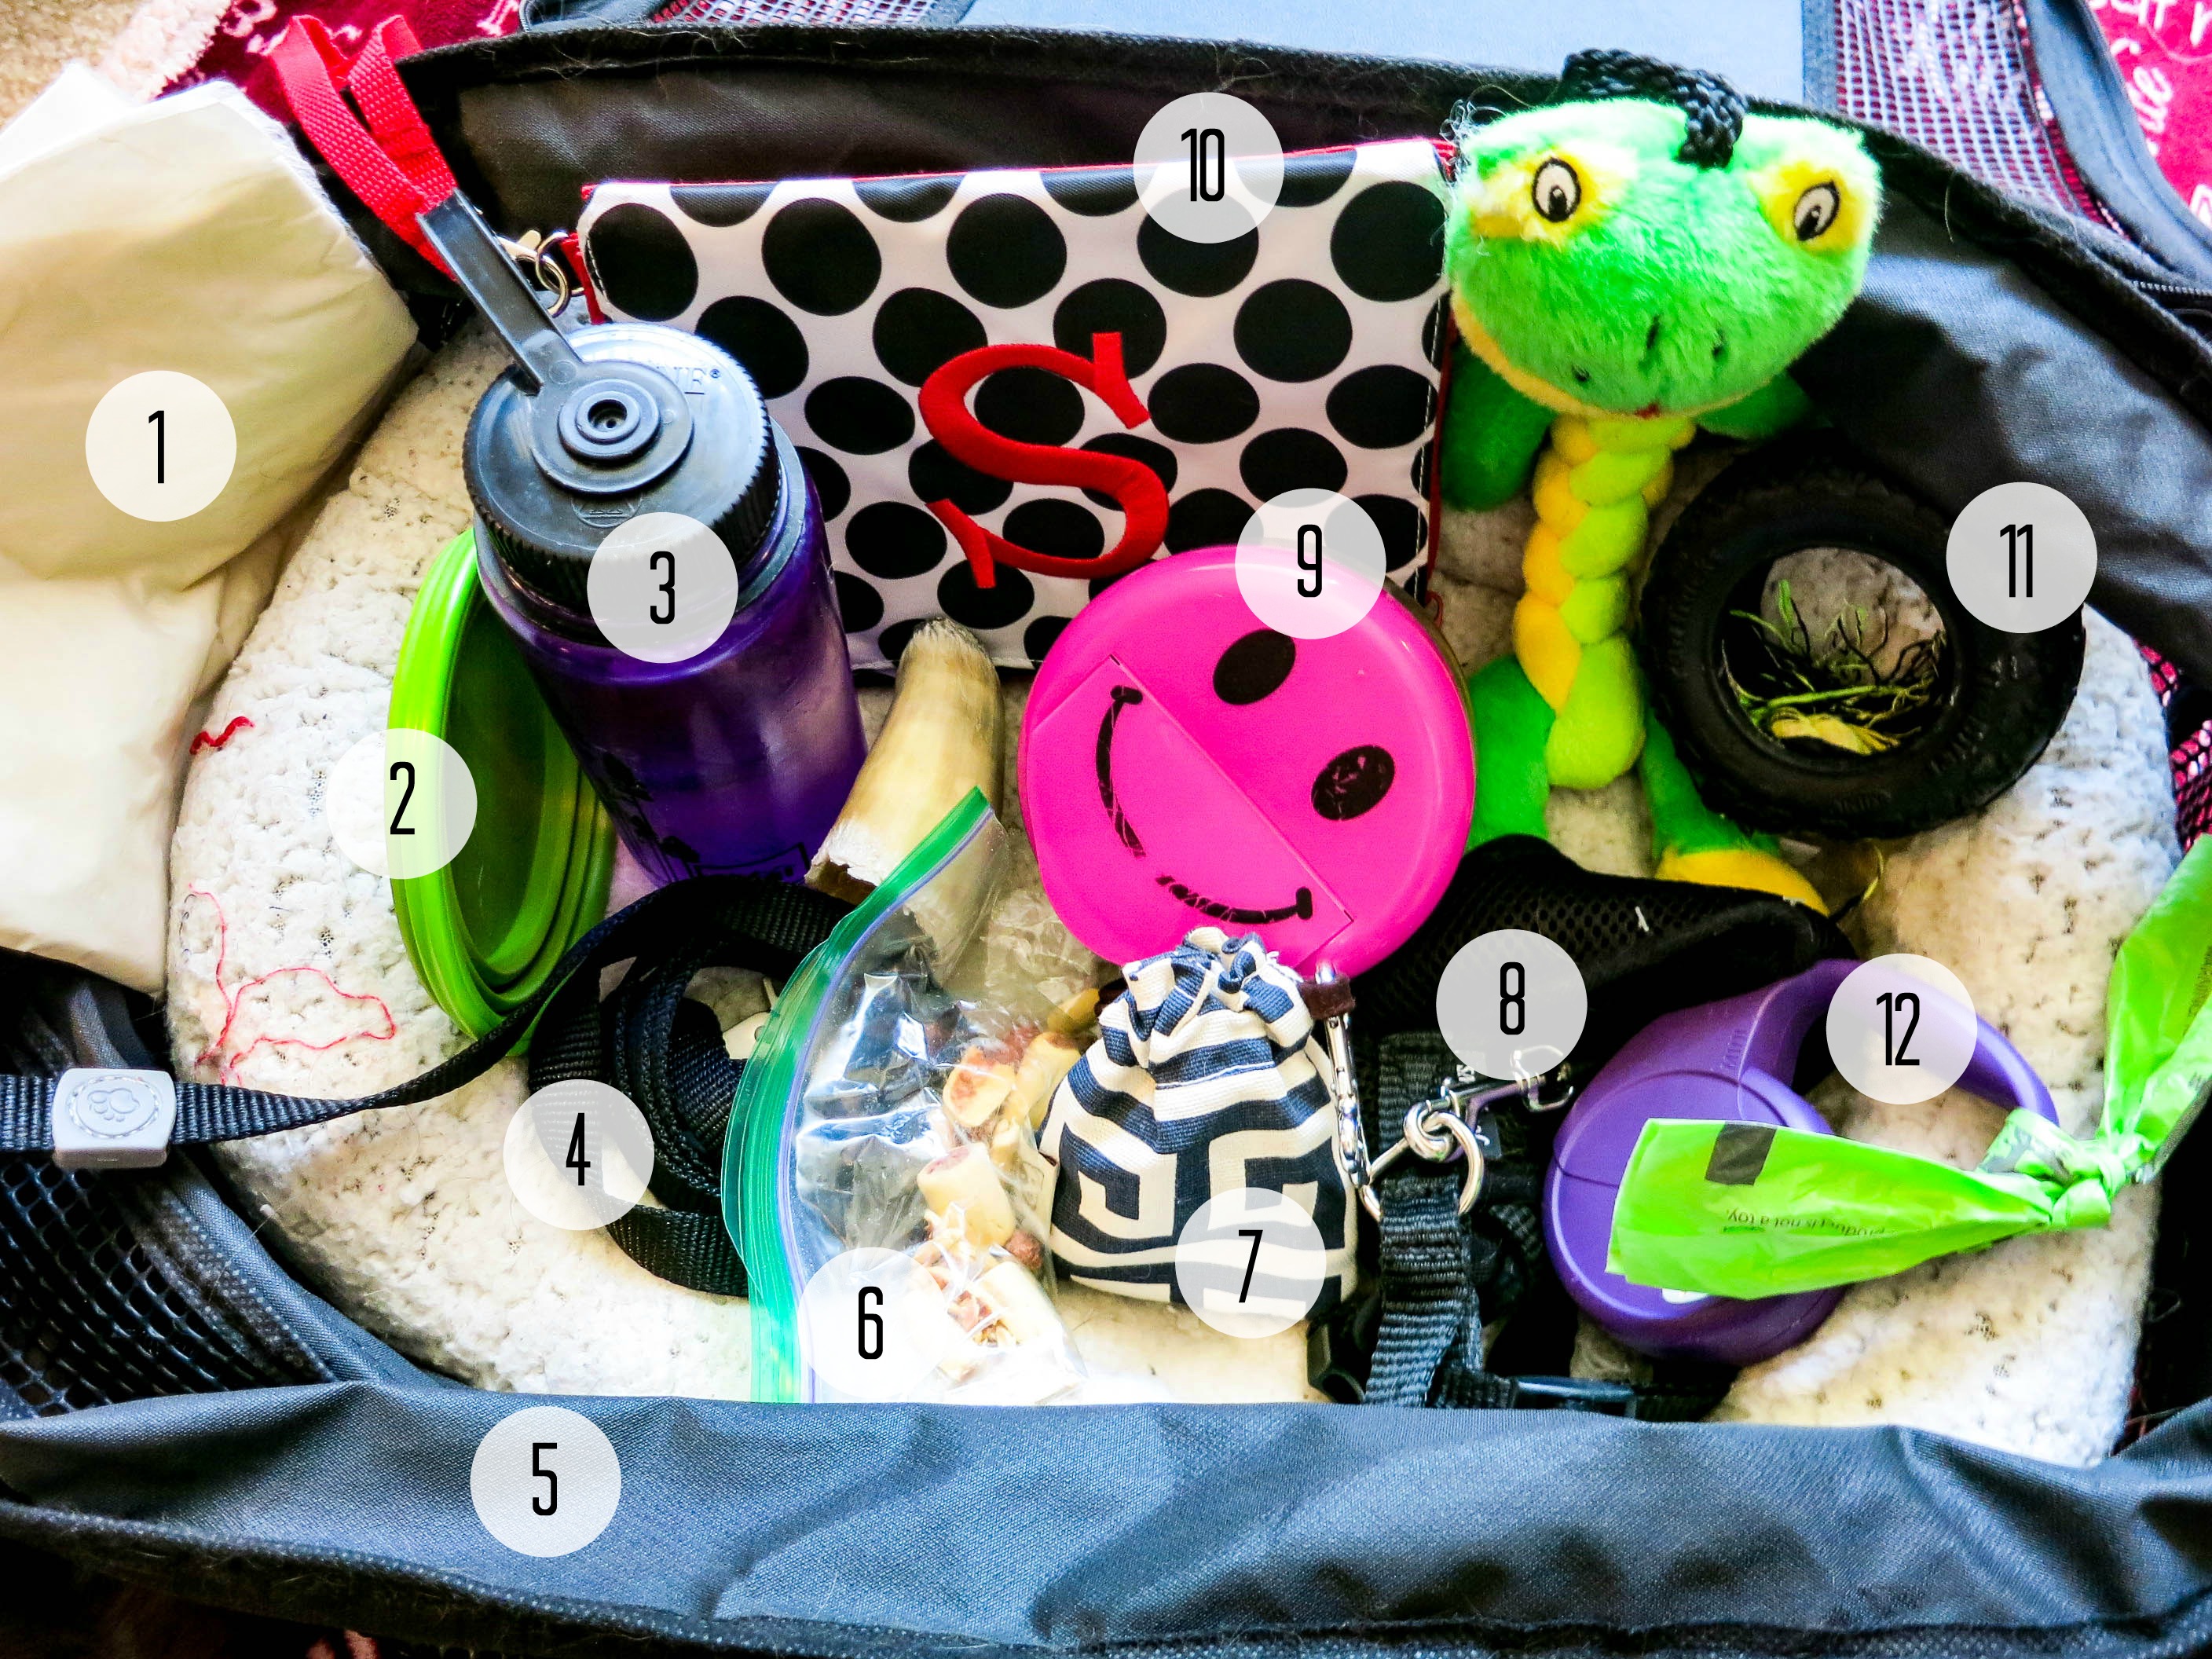 Supplies for flying with pet